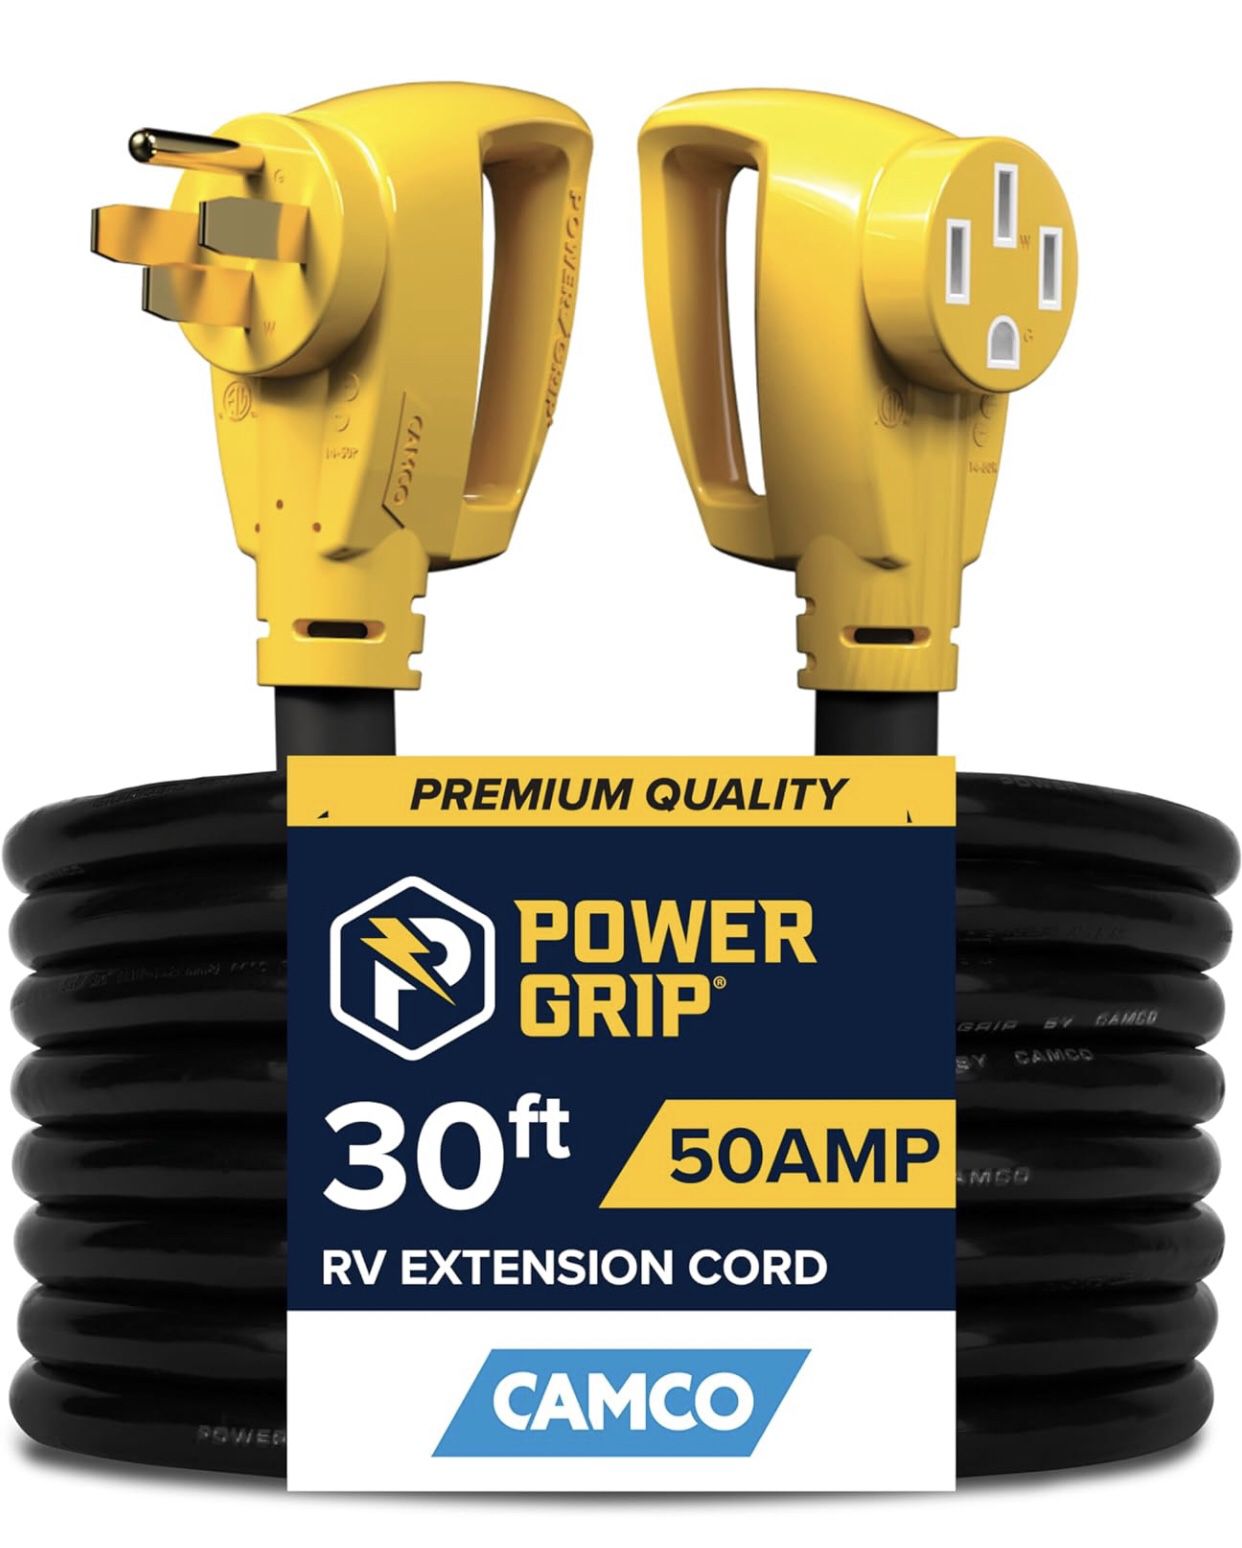 NEW! Camco Power Grip 30-Ft 50 Amp RV Extension Cord - Rated for 125/250 V/12,500 W